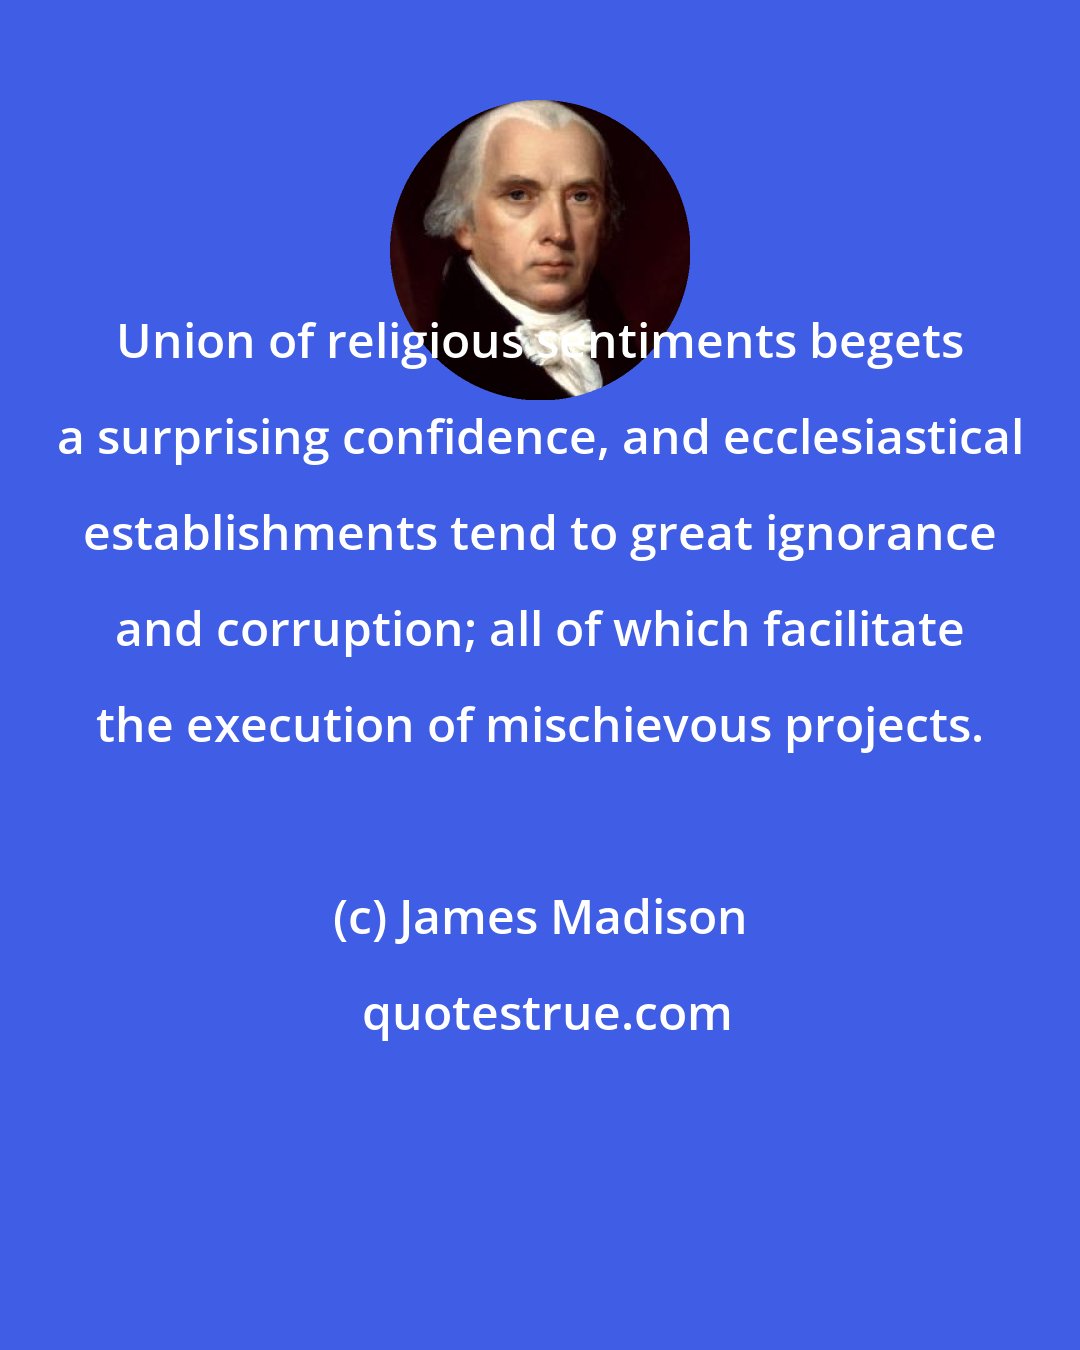 James Madison: Union of religious sentiments begets a surprising confidence, and ecclesiastical establishments tend to great ignorance and corruption; all of which facilitate the execution of mischievous projects.